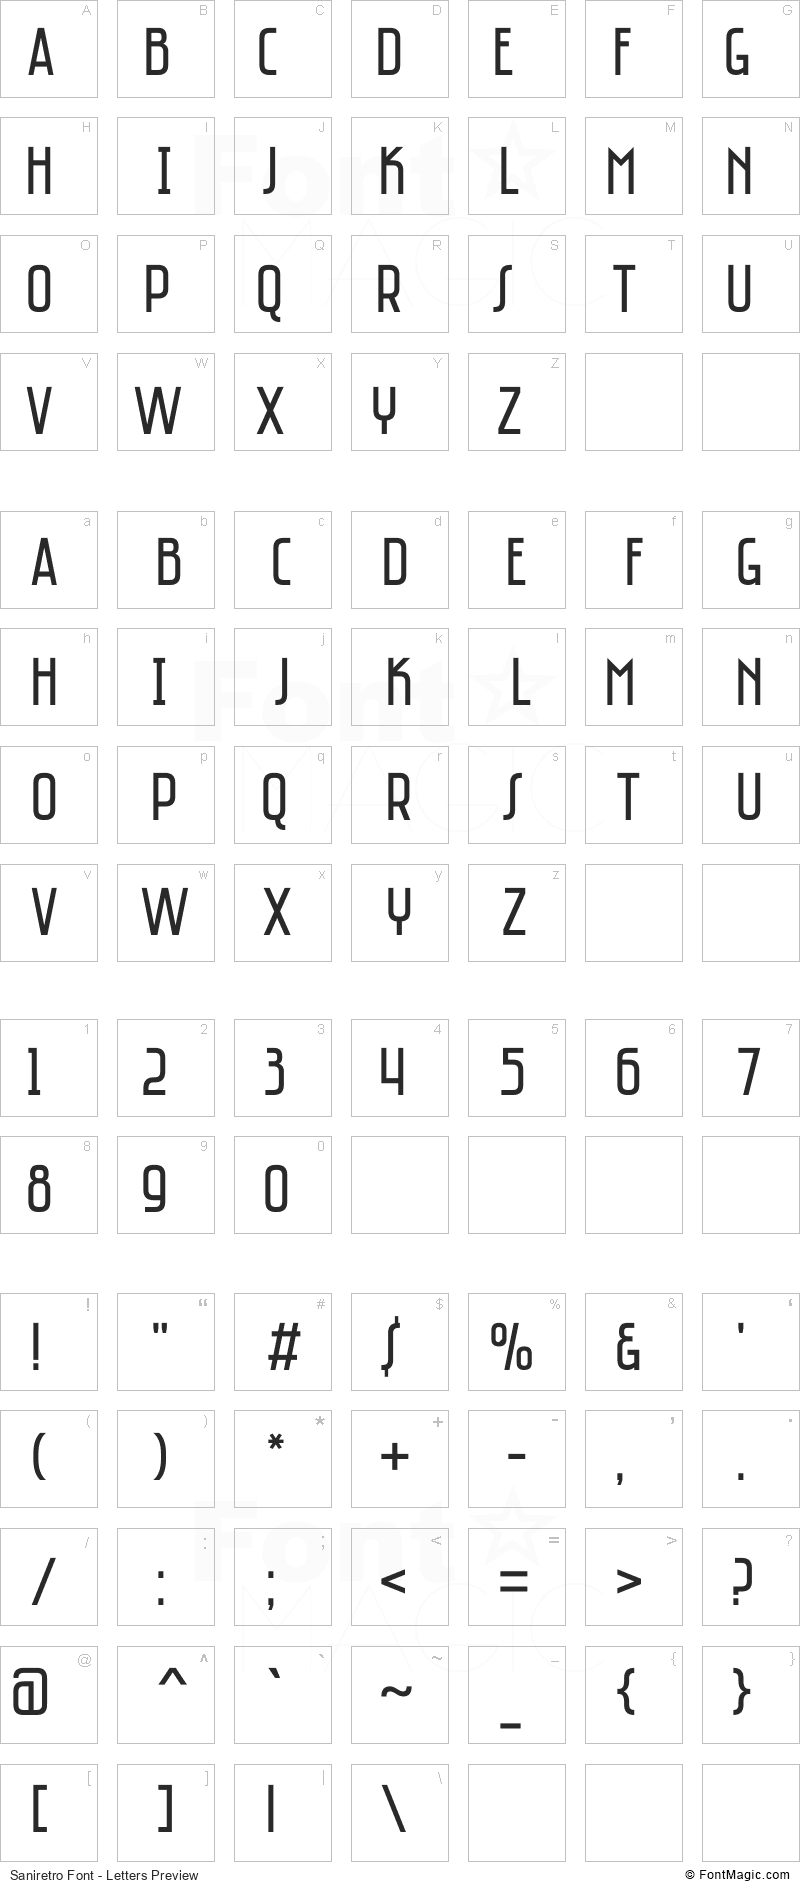 Saniretro Font - All Latters Preview Chart